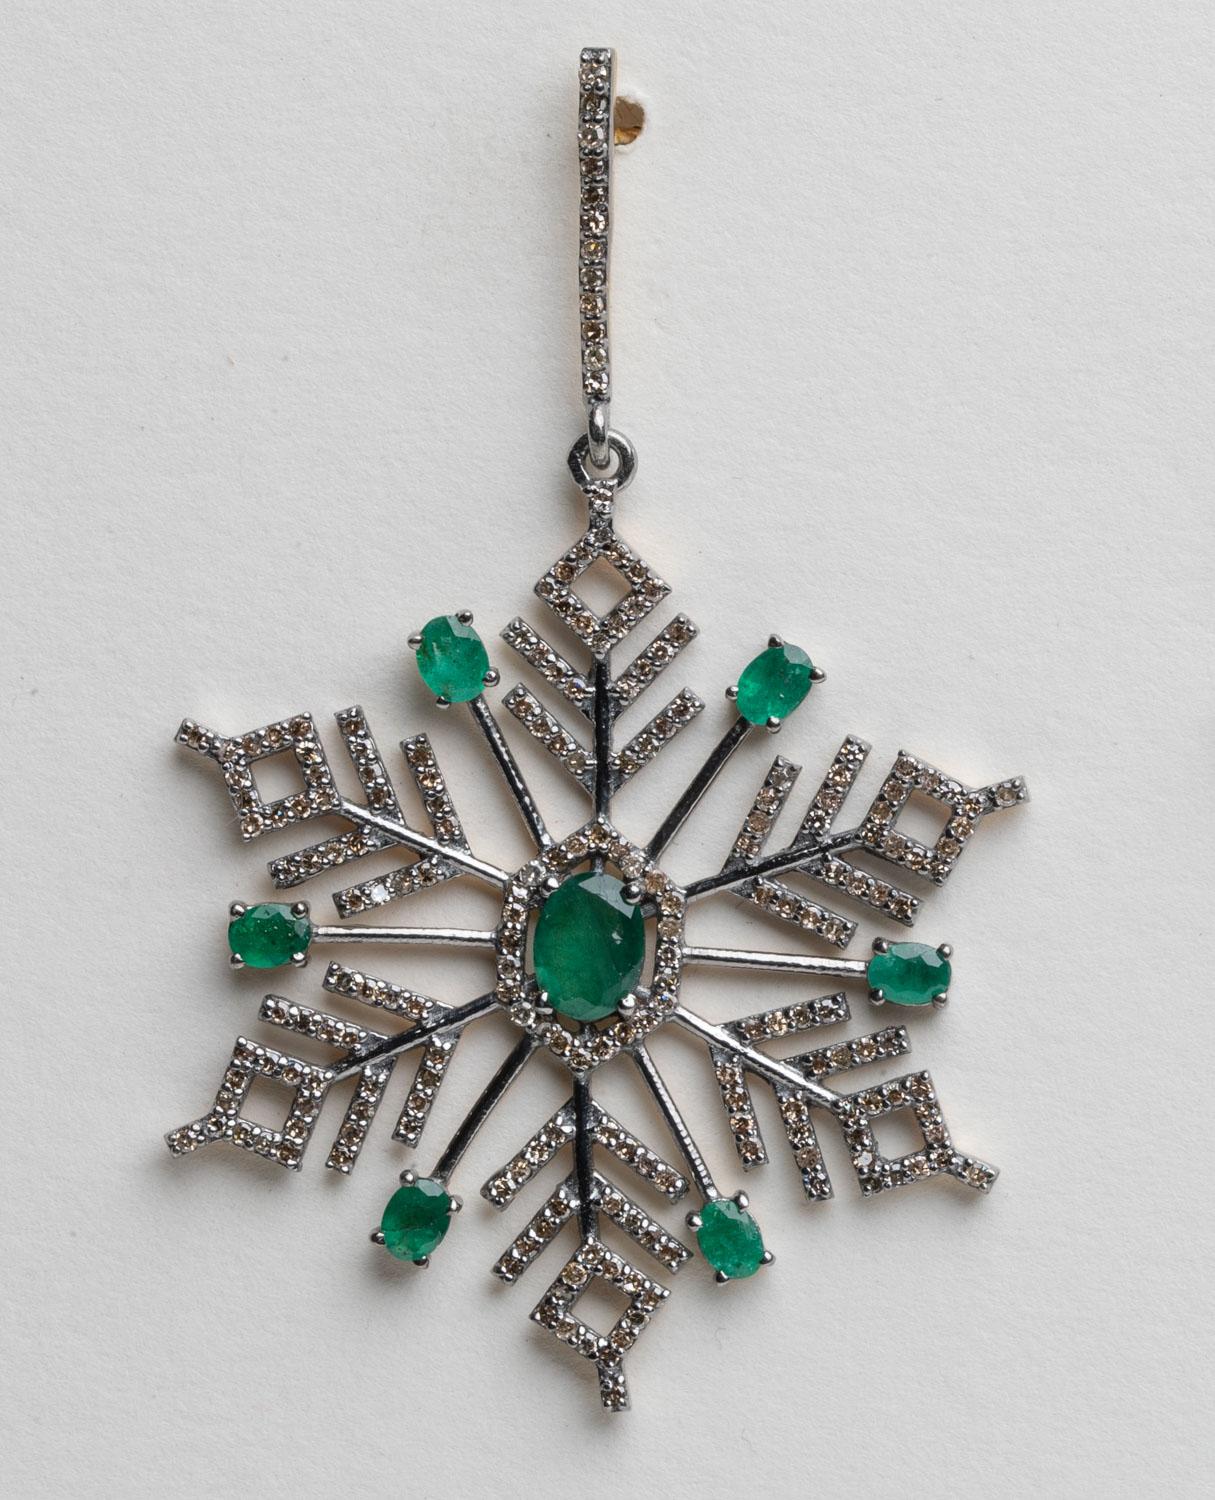 An amazing pair of snowflake motif earrings with faceted oval emeralds with round, brilliant cut diamonds in a pave` setting.  Set in an oxidized sterling silver.  18K gold post for pierced ears.  Total weight of emeralds is 3.18 carats, diamonds